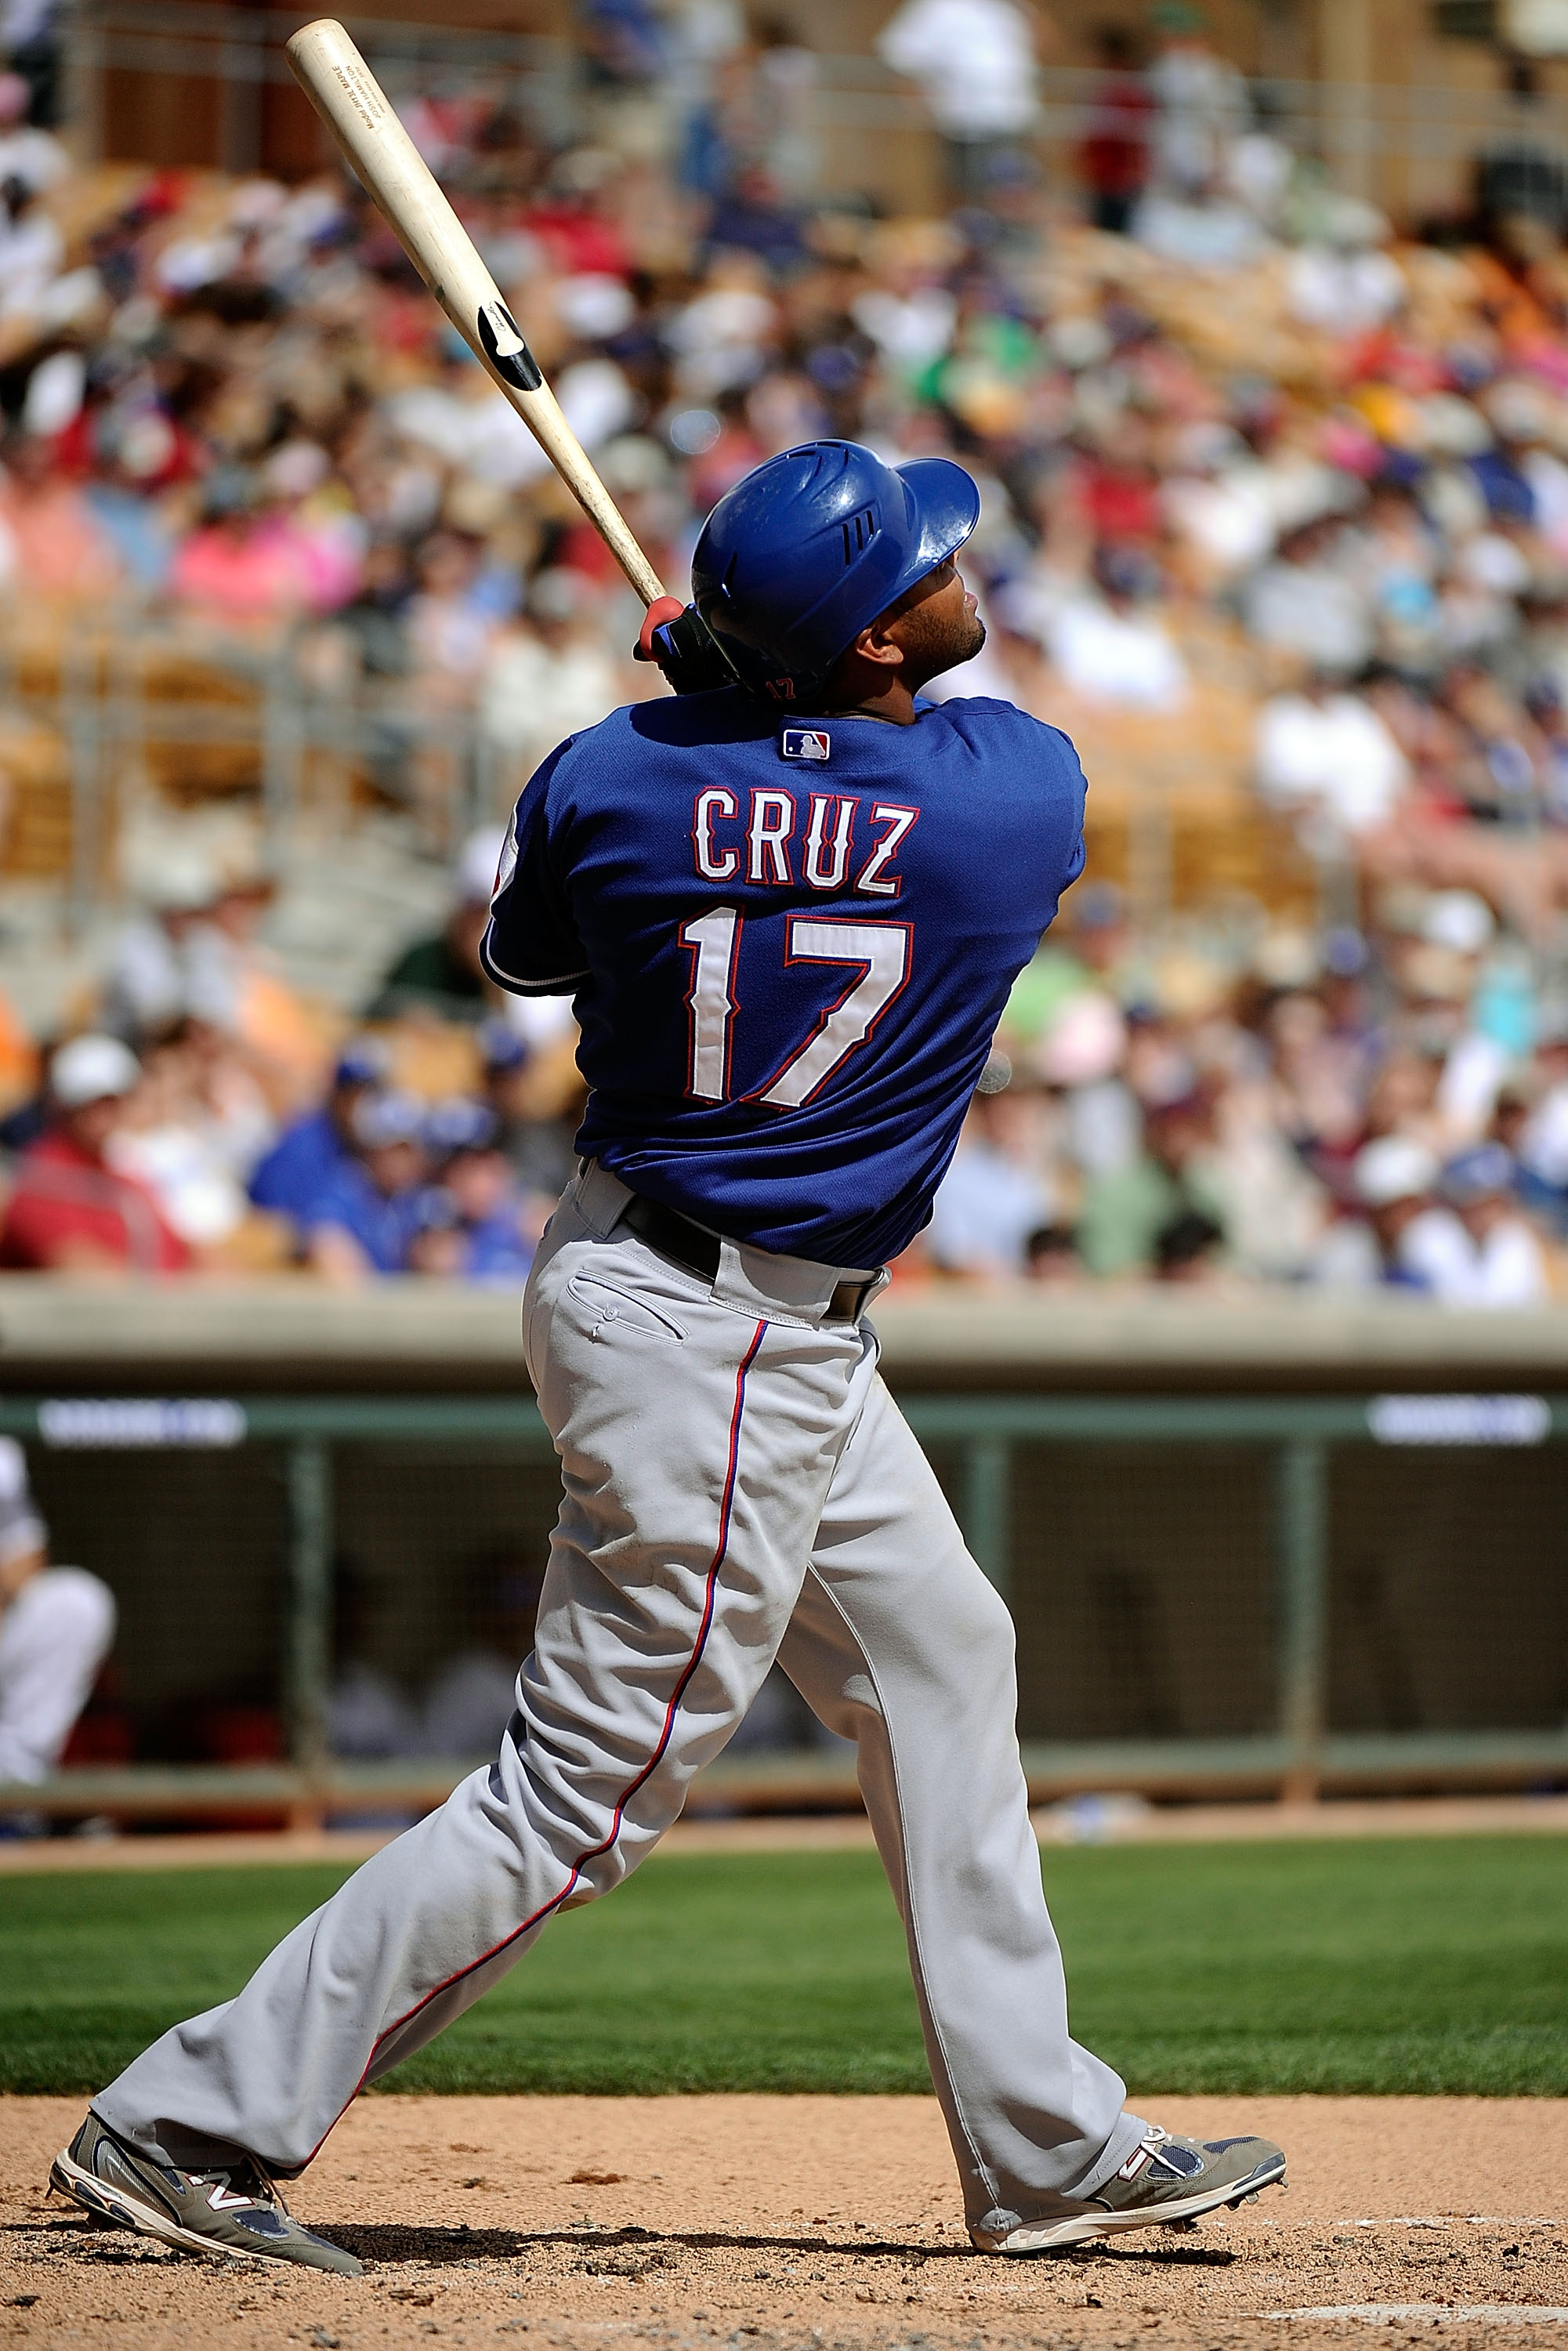 GLENDALE, AZ - MARCH 15:  Nelson Cruz #17 of the Texas Rangers plays against the Los Angeles Dodgers during the spring training baseball game at Camelback Ranch on March 15, 2011 in Glendale, Arizona.  (Photo by Kevork Djansezian/Getty Images)